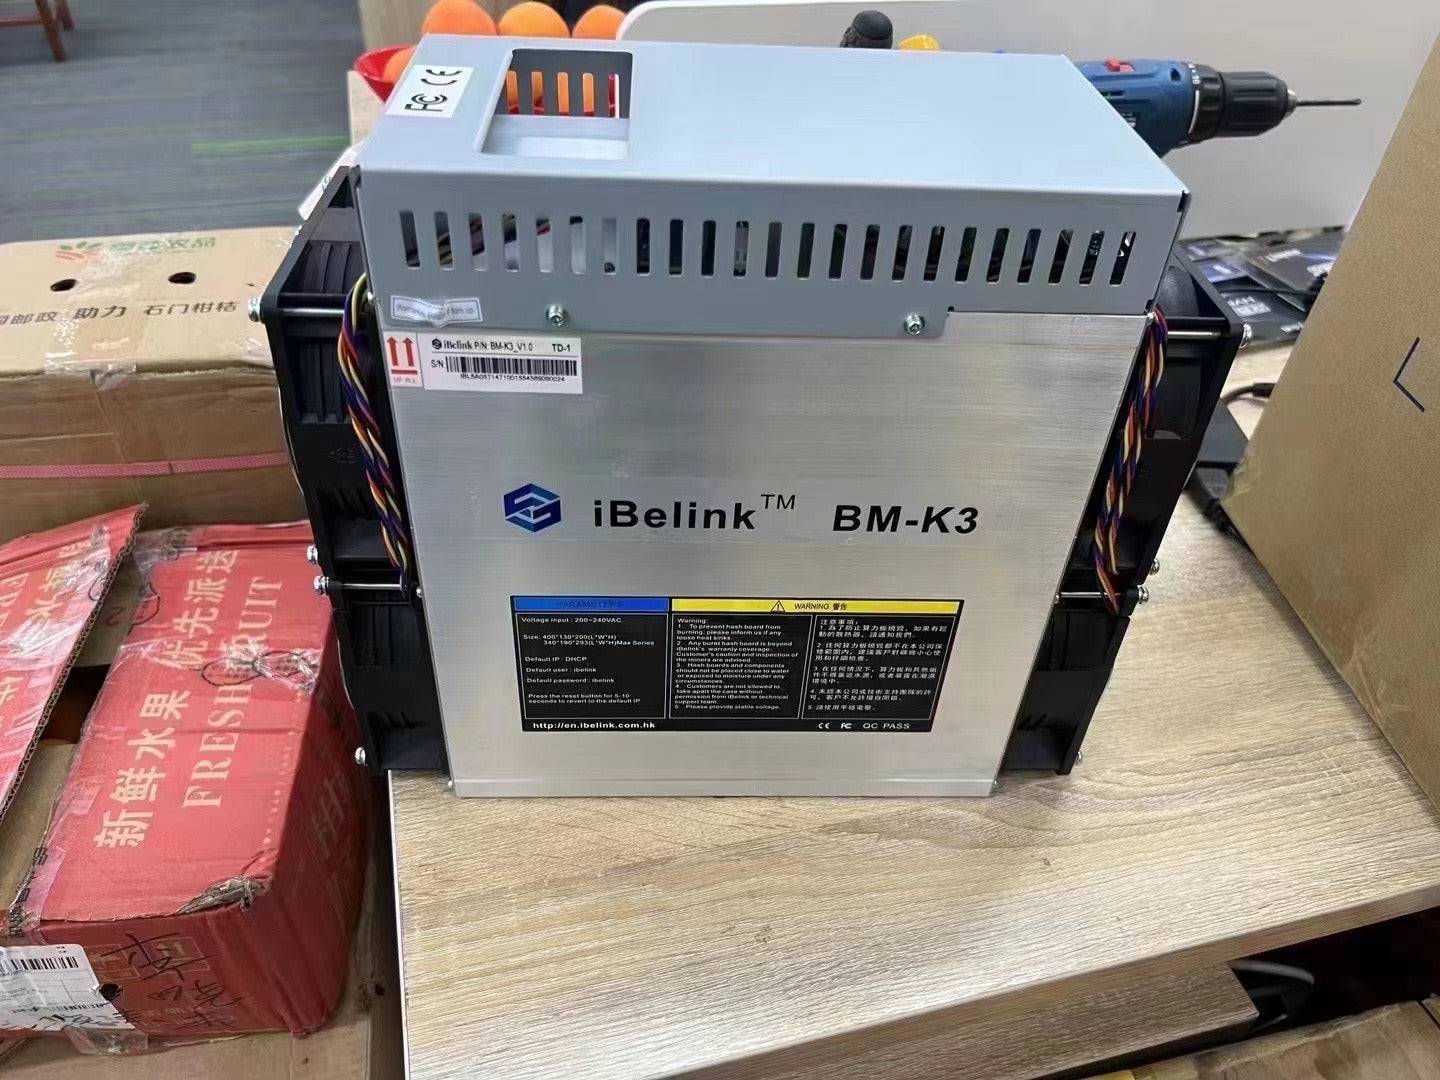 Model BM-K3 from iBeLink mining Kadena algorithm with a maximum hashrate of 70Th/s for a power consumption of 3300W.